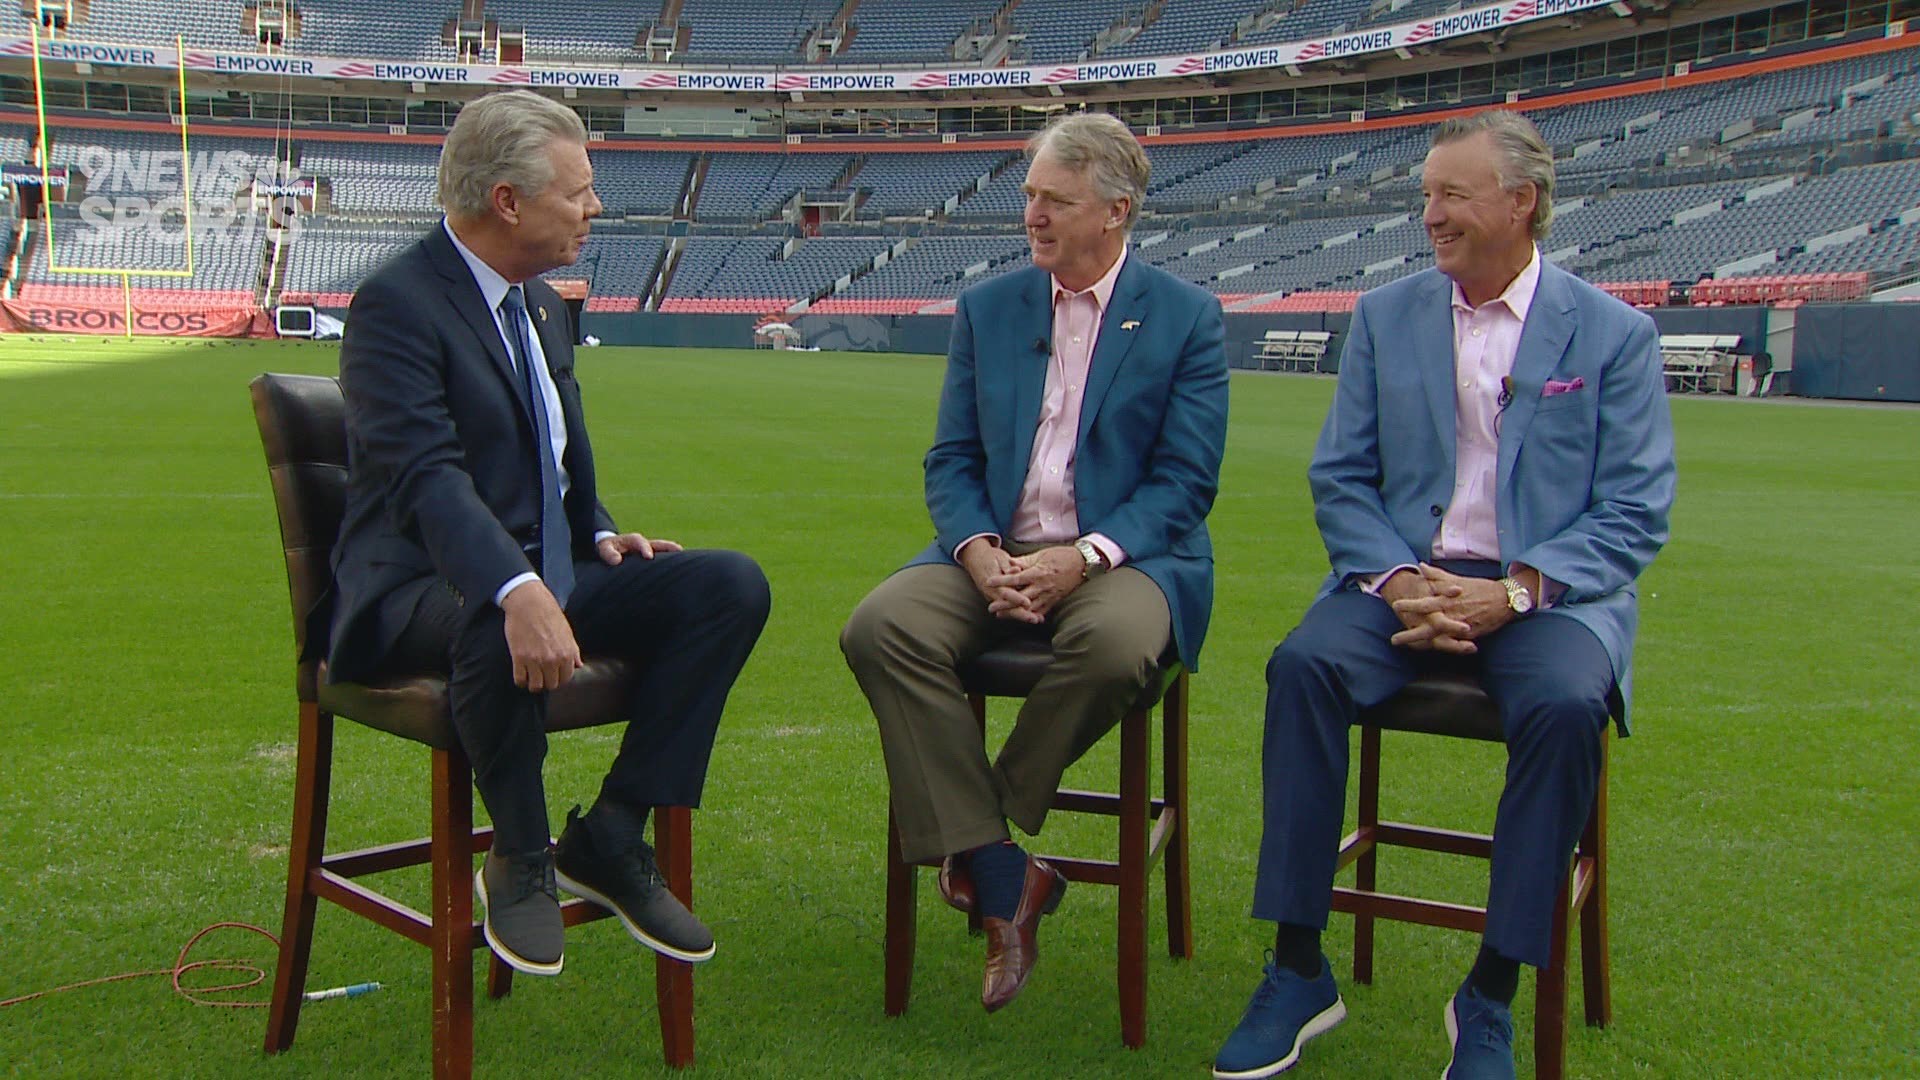 9NEWS' Broncos Insider Mike Klis speaks with Broncos President/CEO Joe Ellis and Empower Retirement President/CEO Ed Murphy III about newly named Empower Stadium at Mile High.